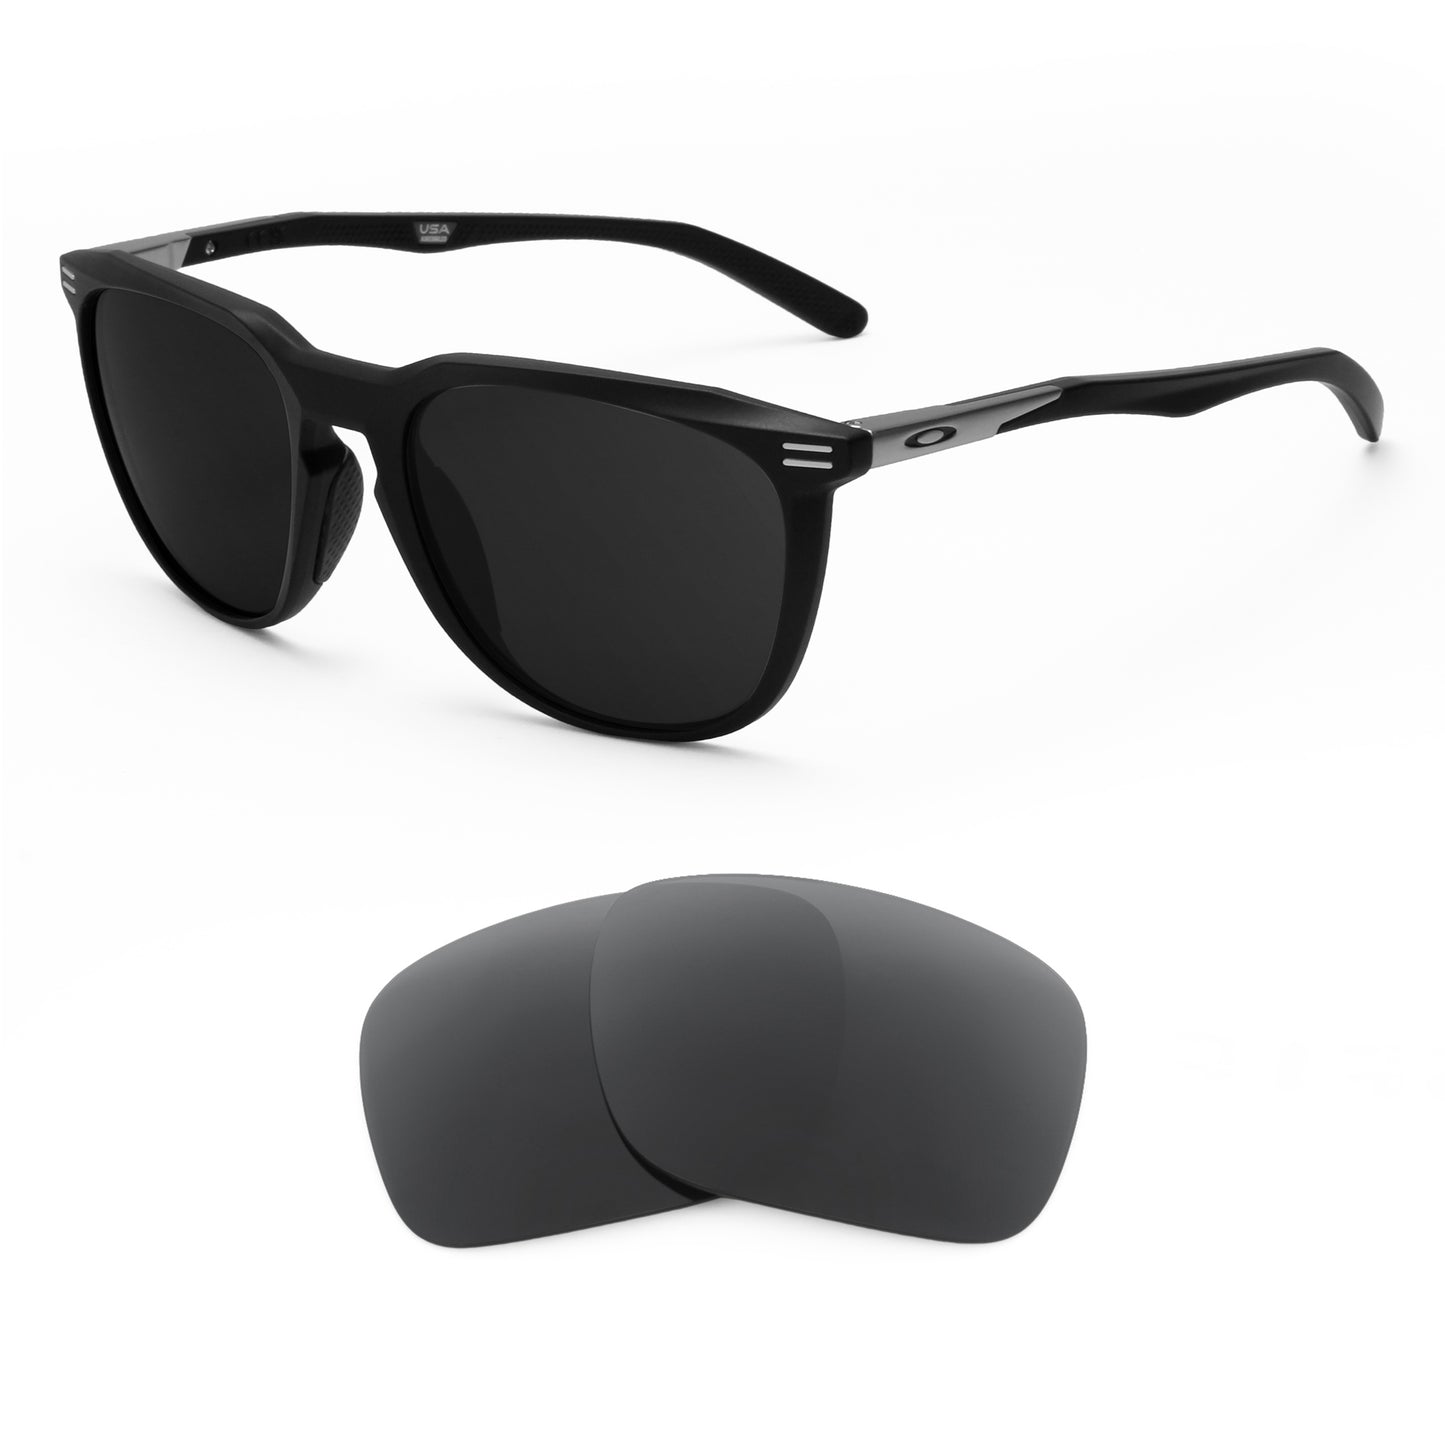 Oakley Thurso sunglasses with replacement lenses